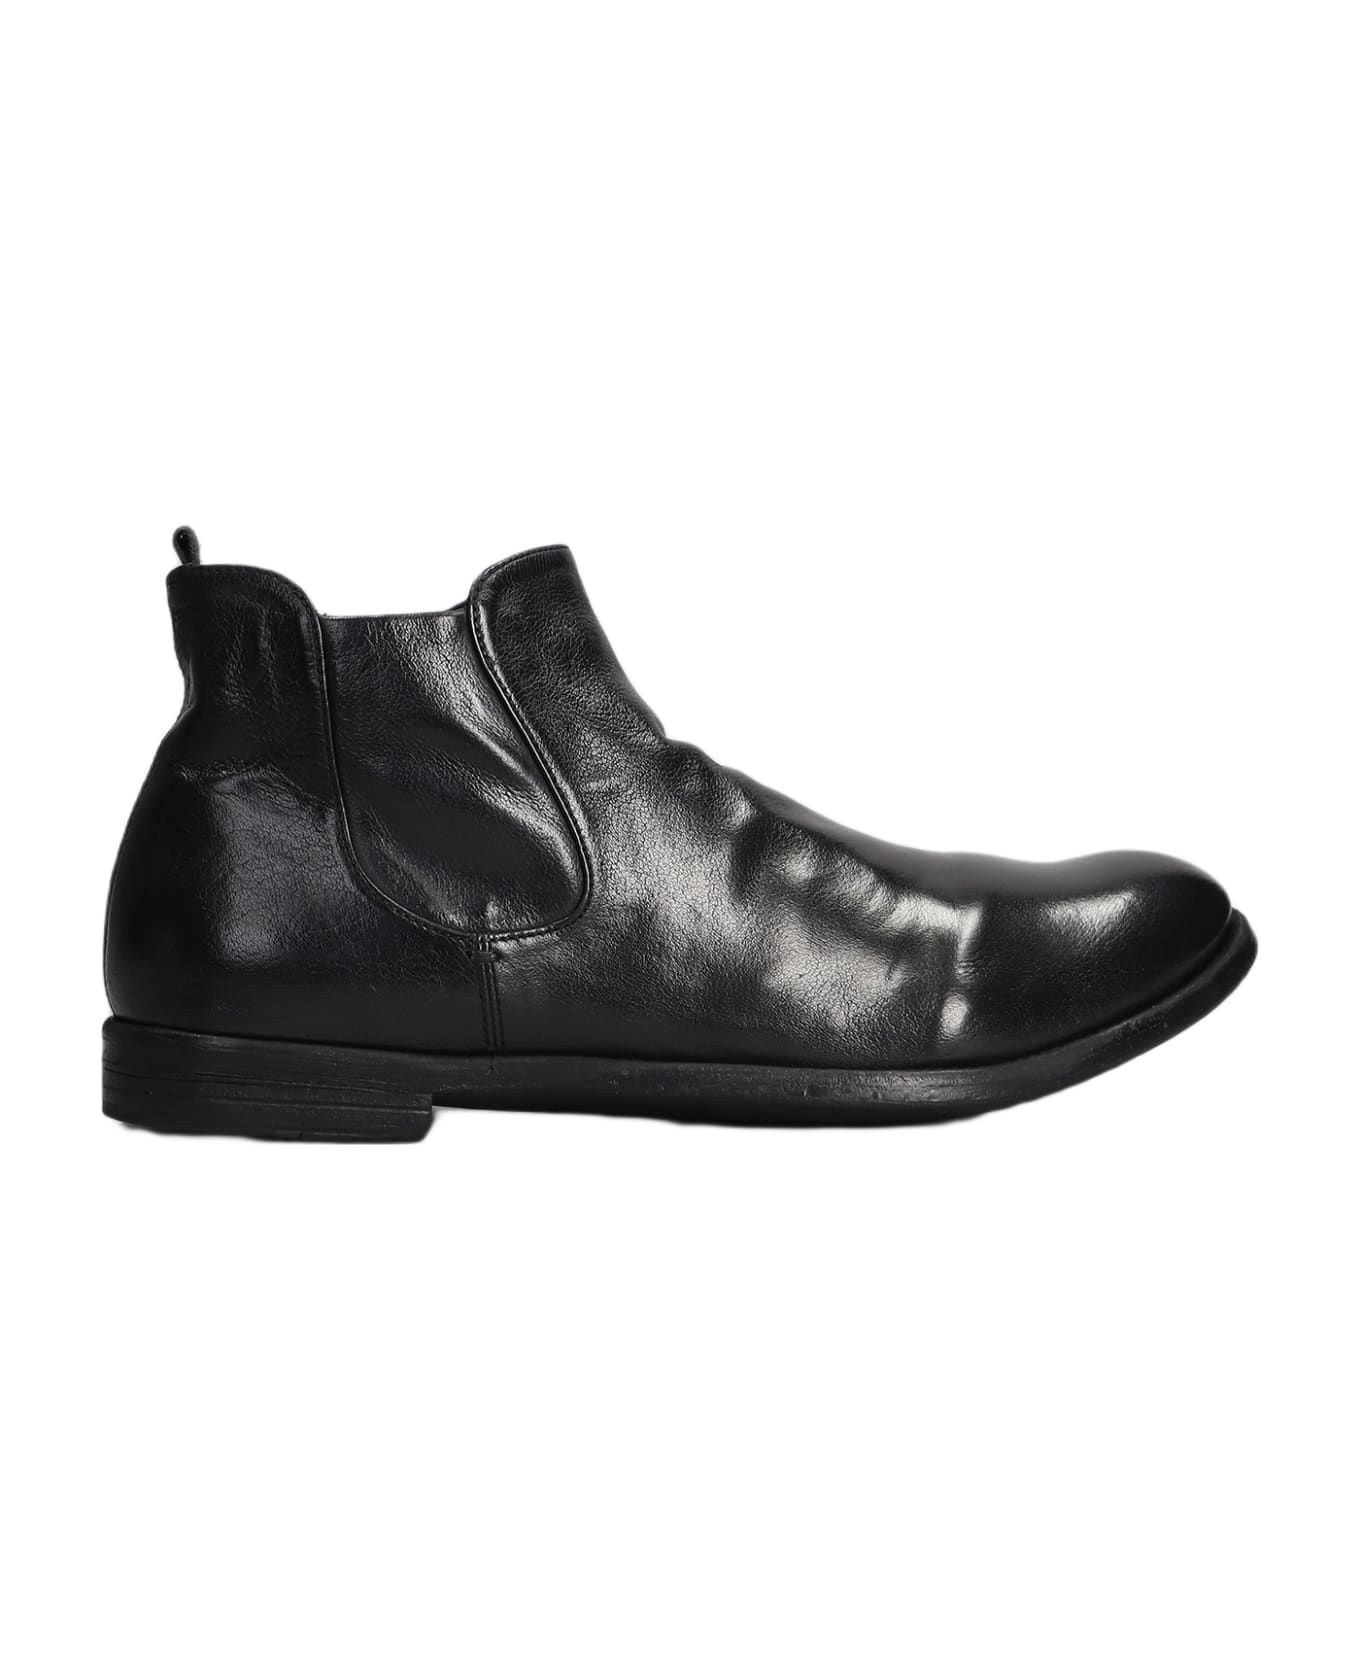 Officine Creative Arc -514 Ankle Boots In Black Leather - black ブーツ